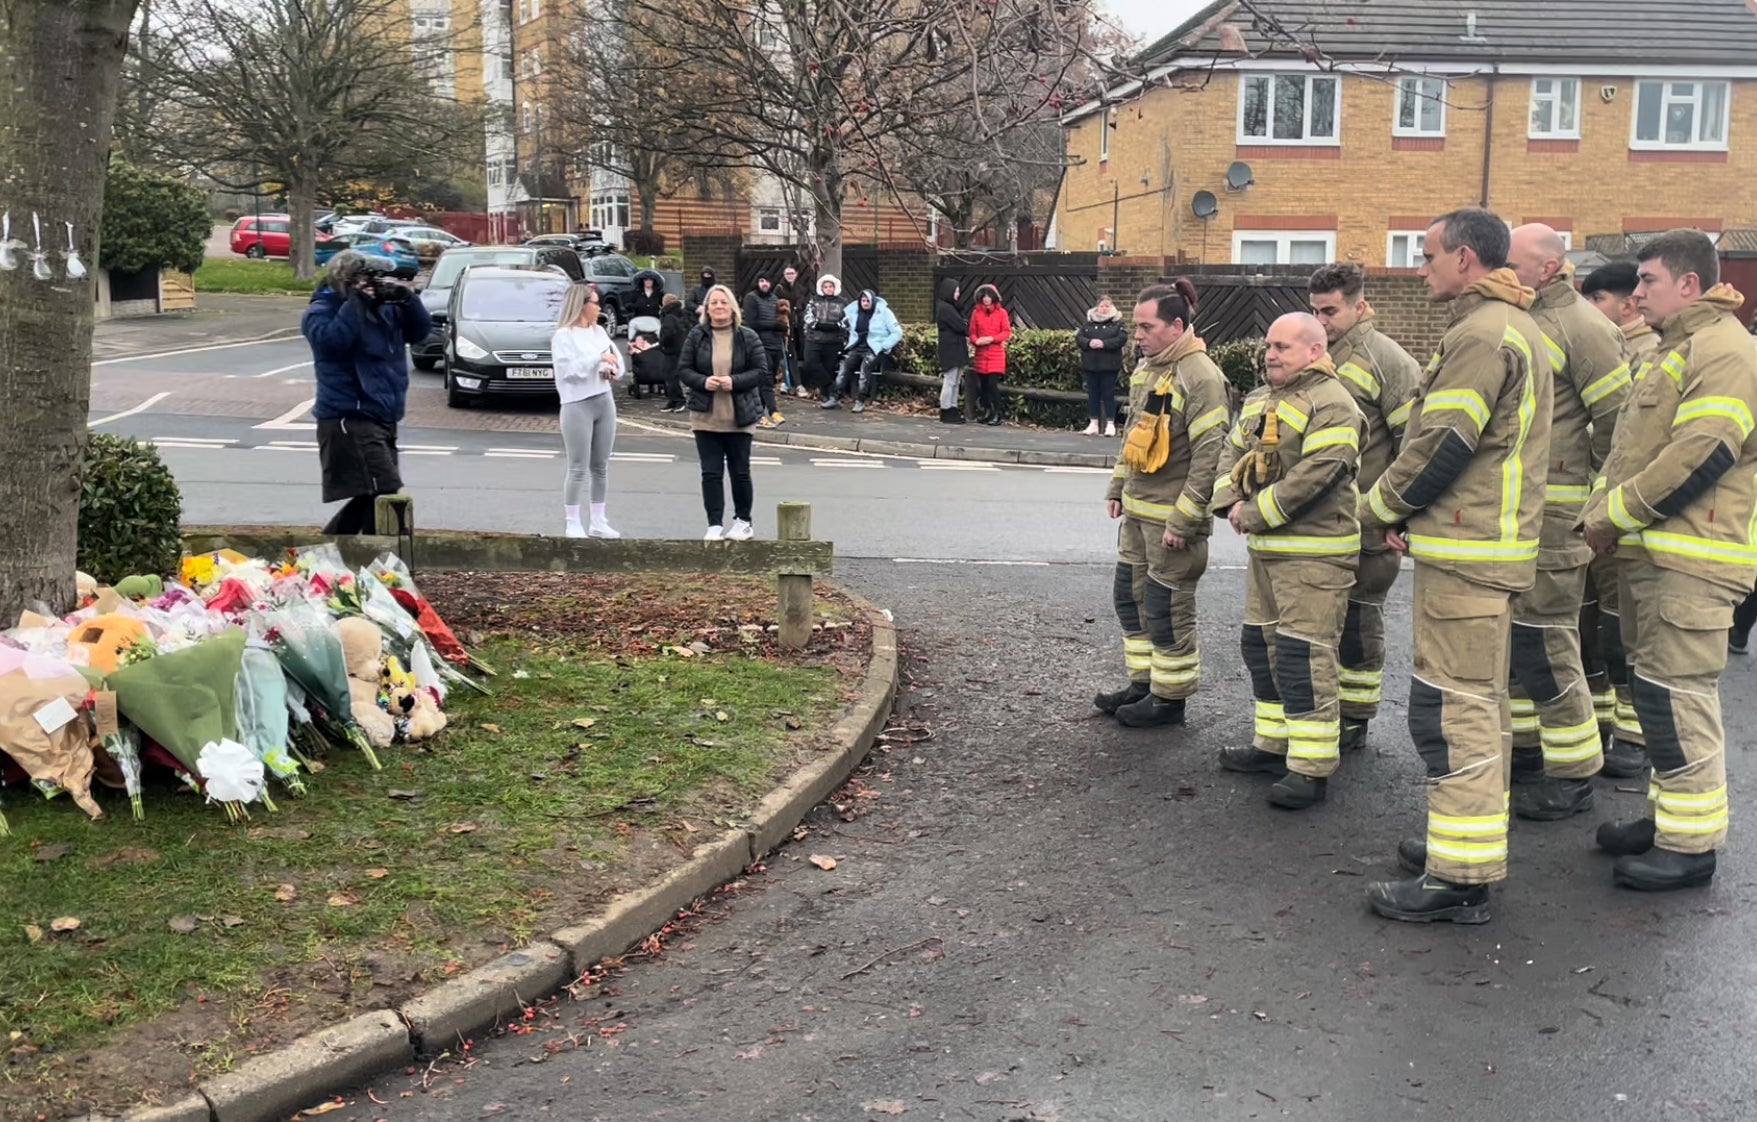 Members of West Midlands Fire Service have paid tribute to the three boys who died